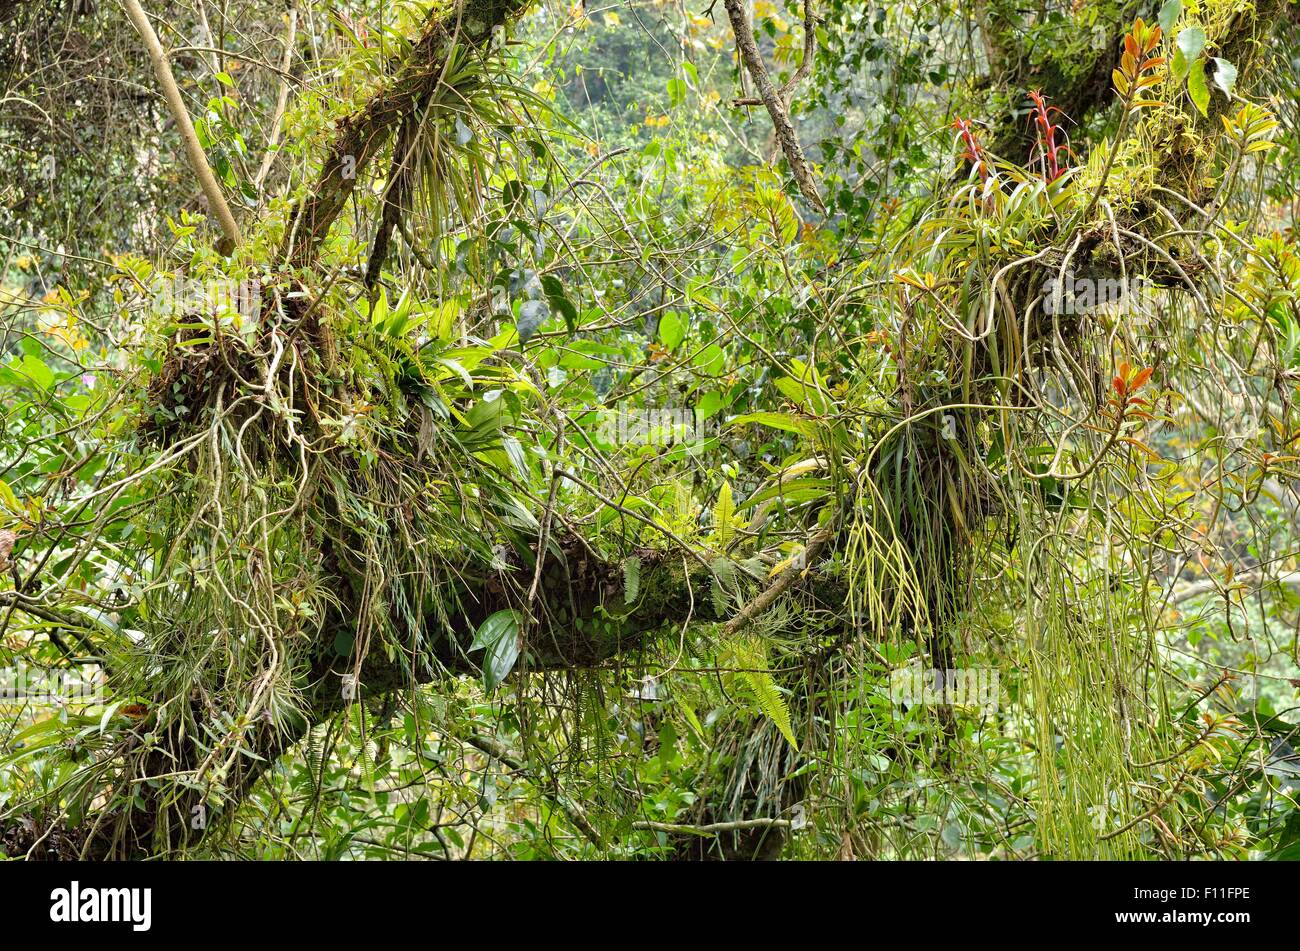 Small biotope with orchids, bromeliads, ferns and tillandsias in a forked branch, rainforest at Cascada de Texolo Stock Photo